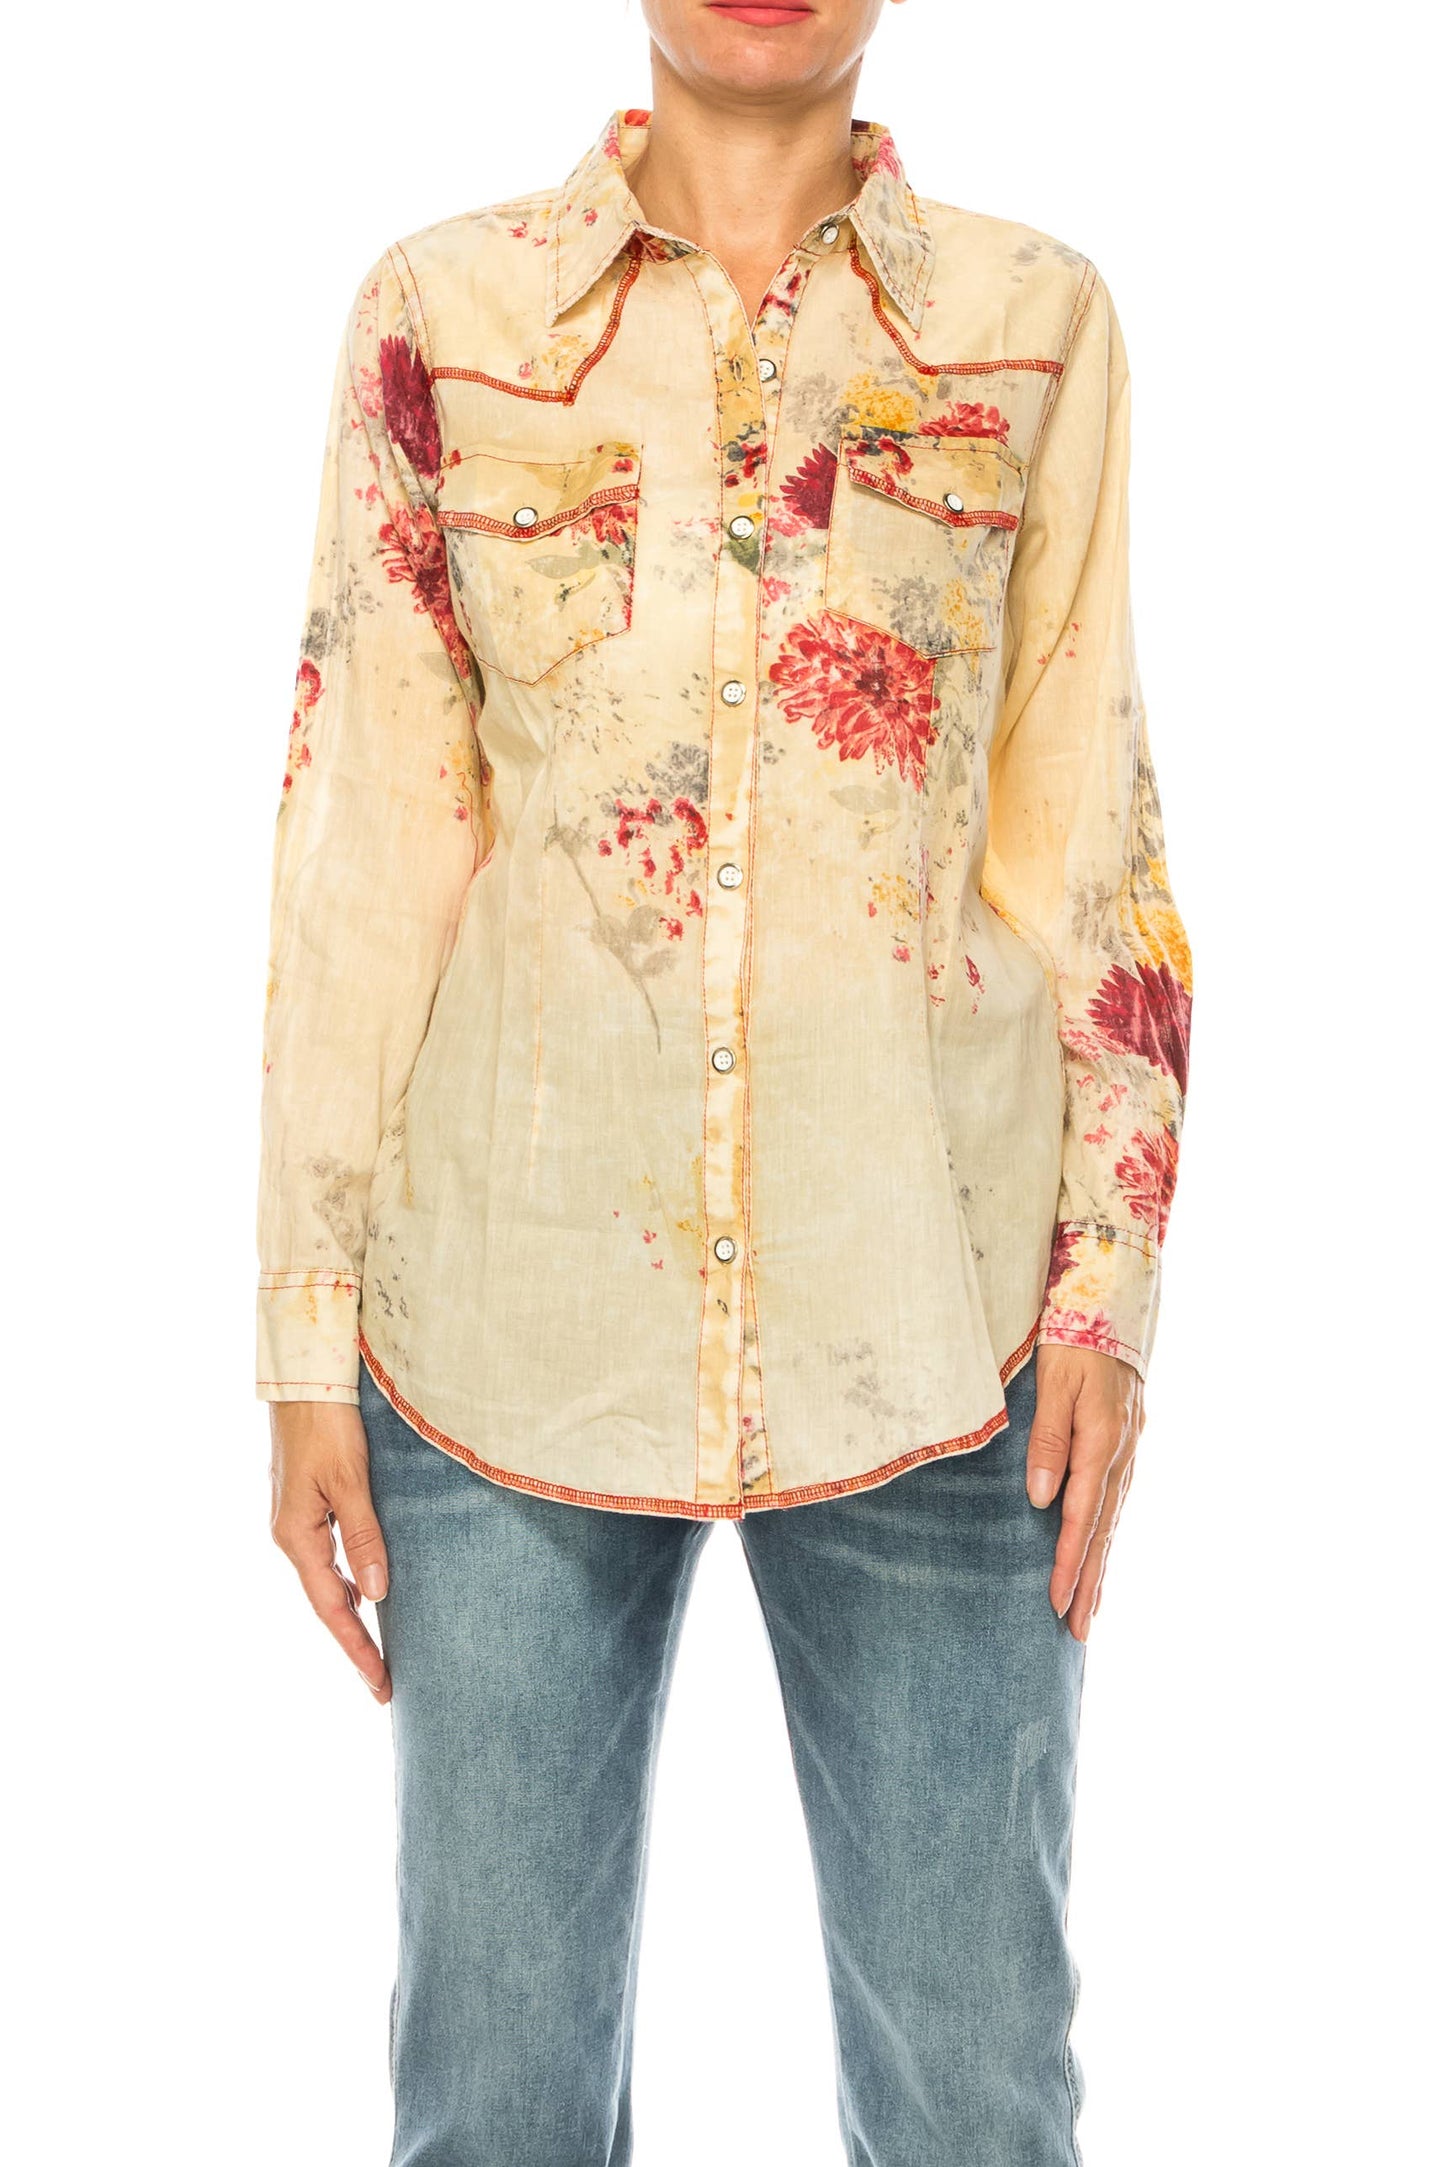 Magazine Clothing - Taupe Floral Button Down Western Shirt: X-Large